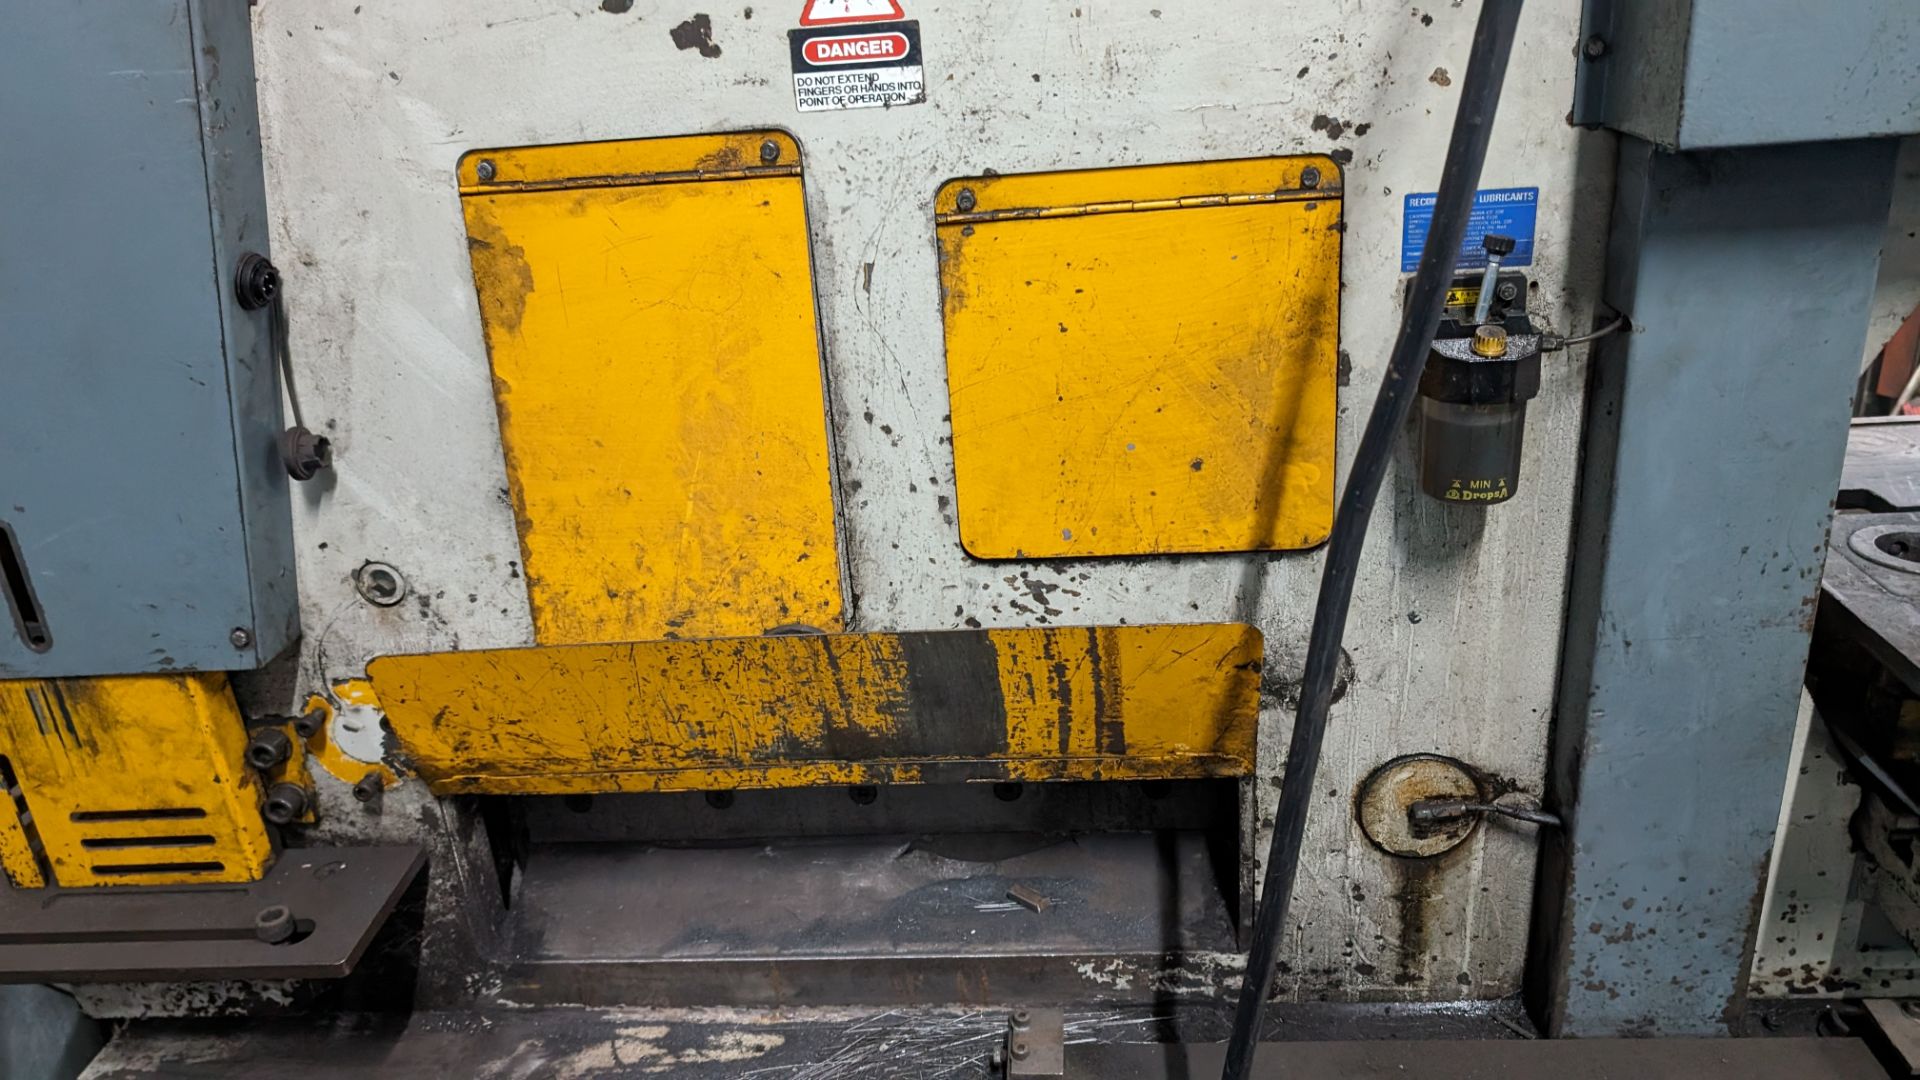 Kingsland multi 125 hydraulic metalworker, serial number 473906. Includes foot pedal plus tooling a - Image 19 of 22